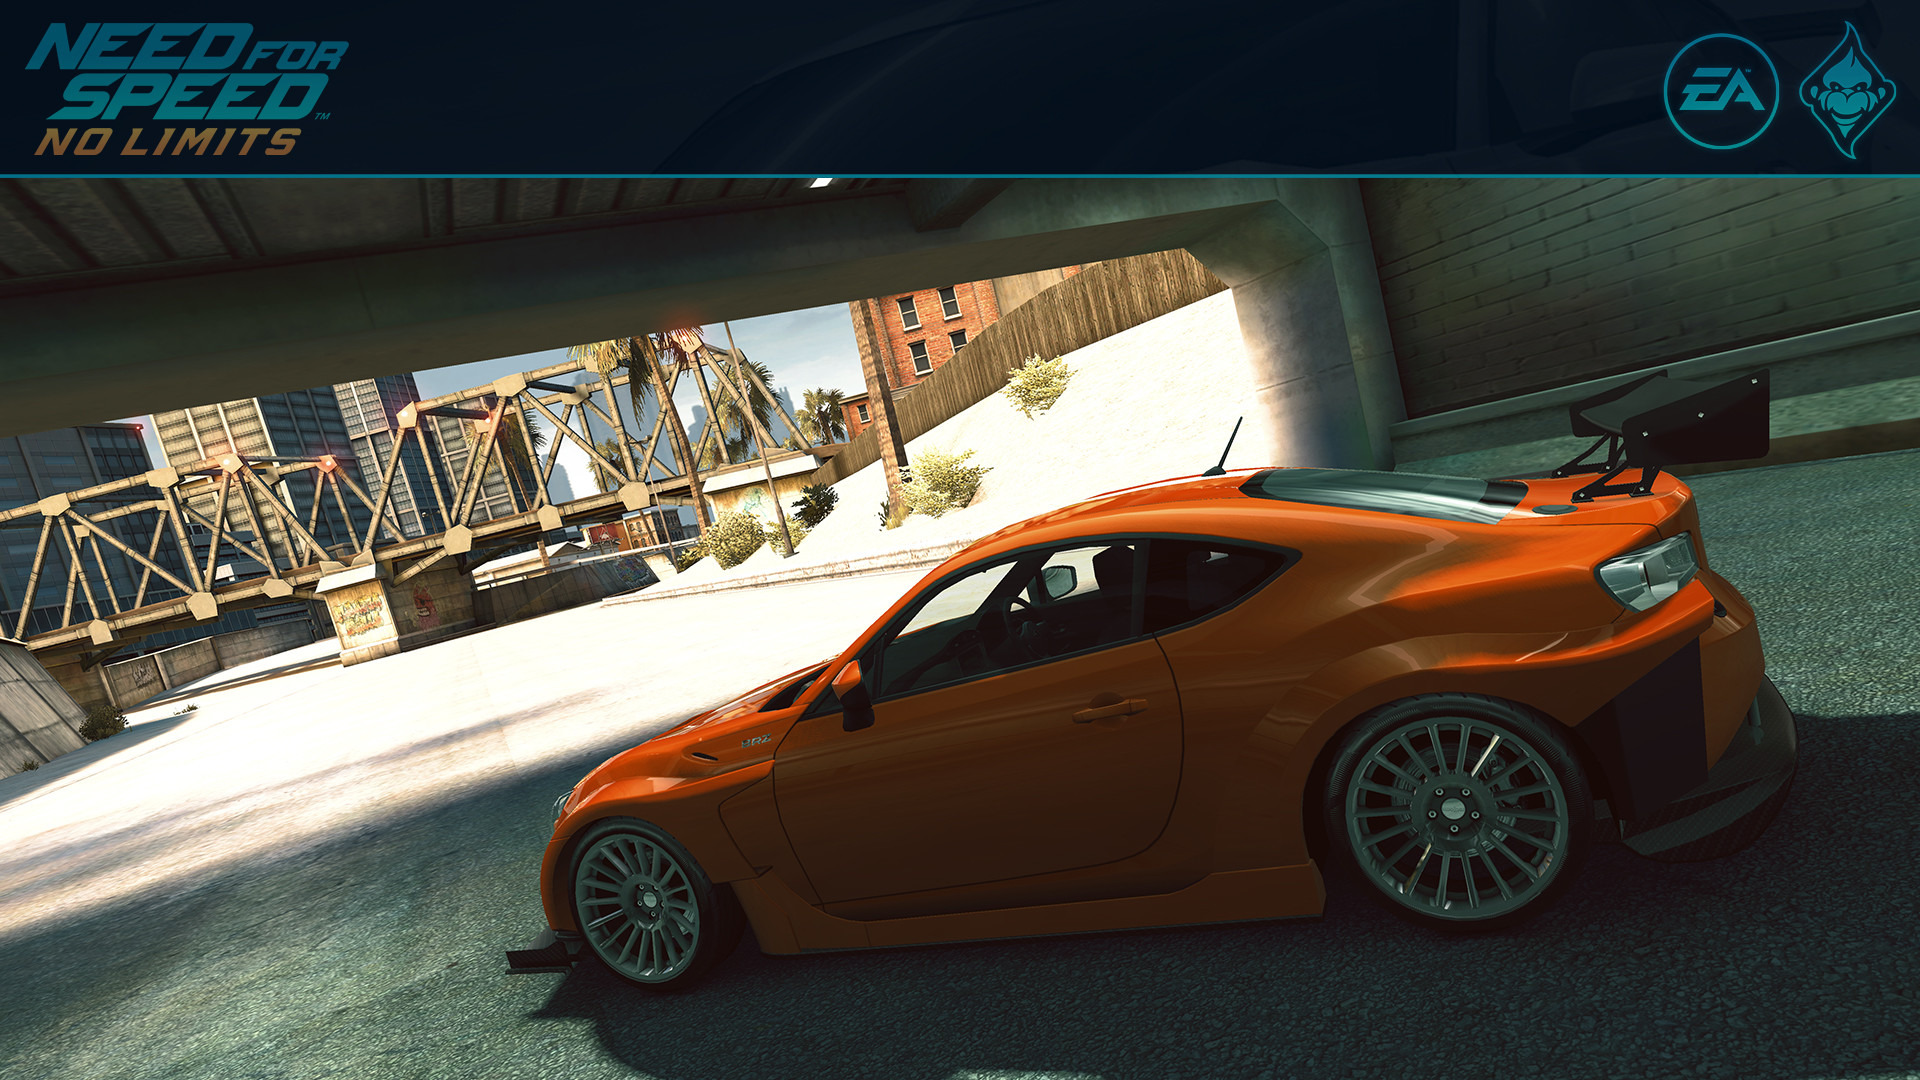 need for speed no limits wallpaper,land vehicle,vehicle,car,sports car,automotive design